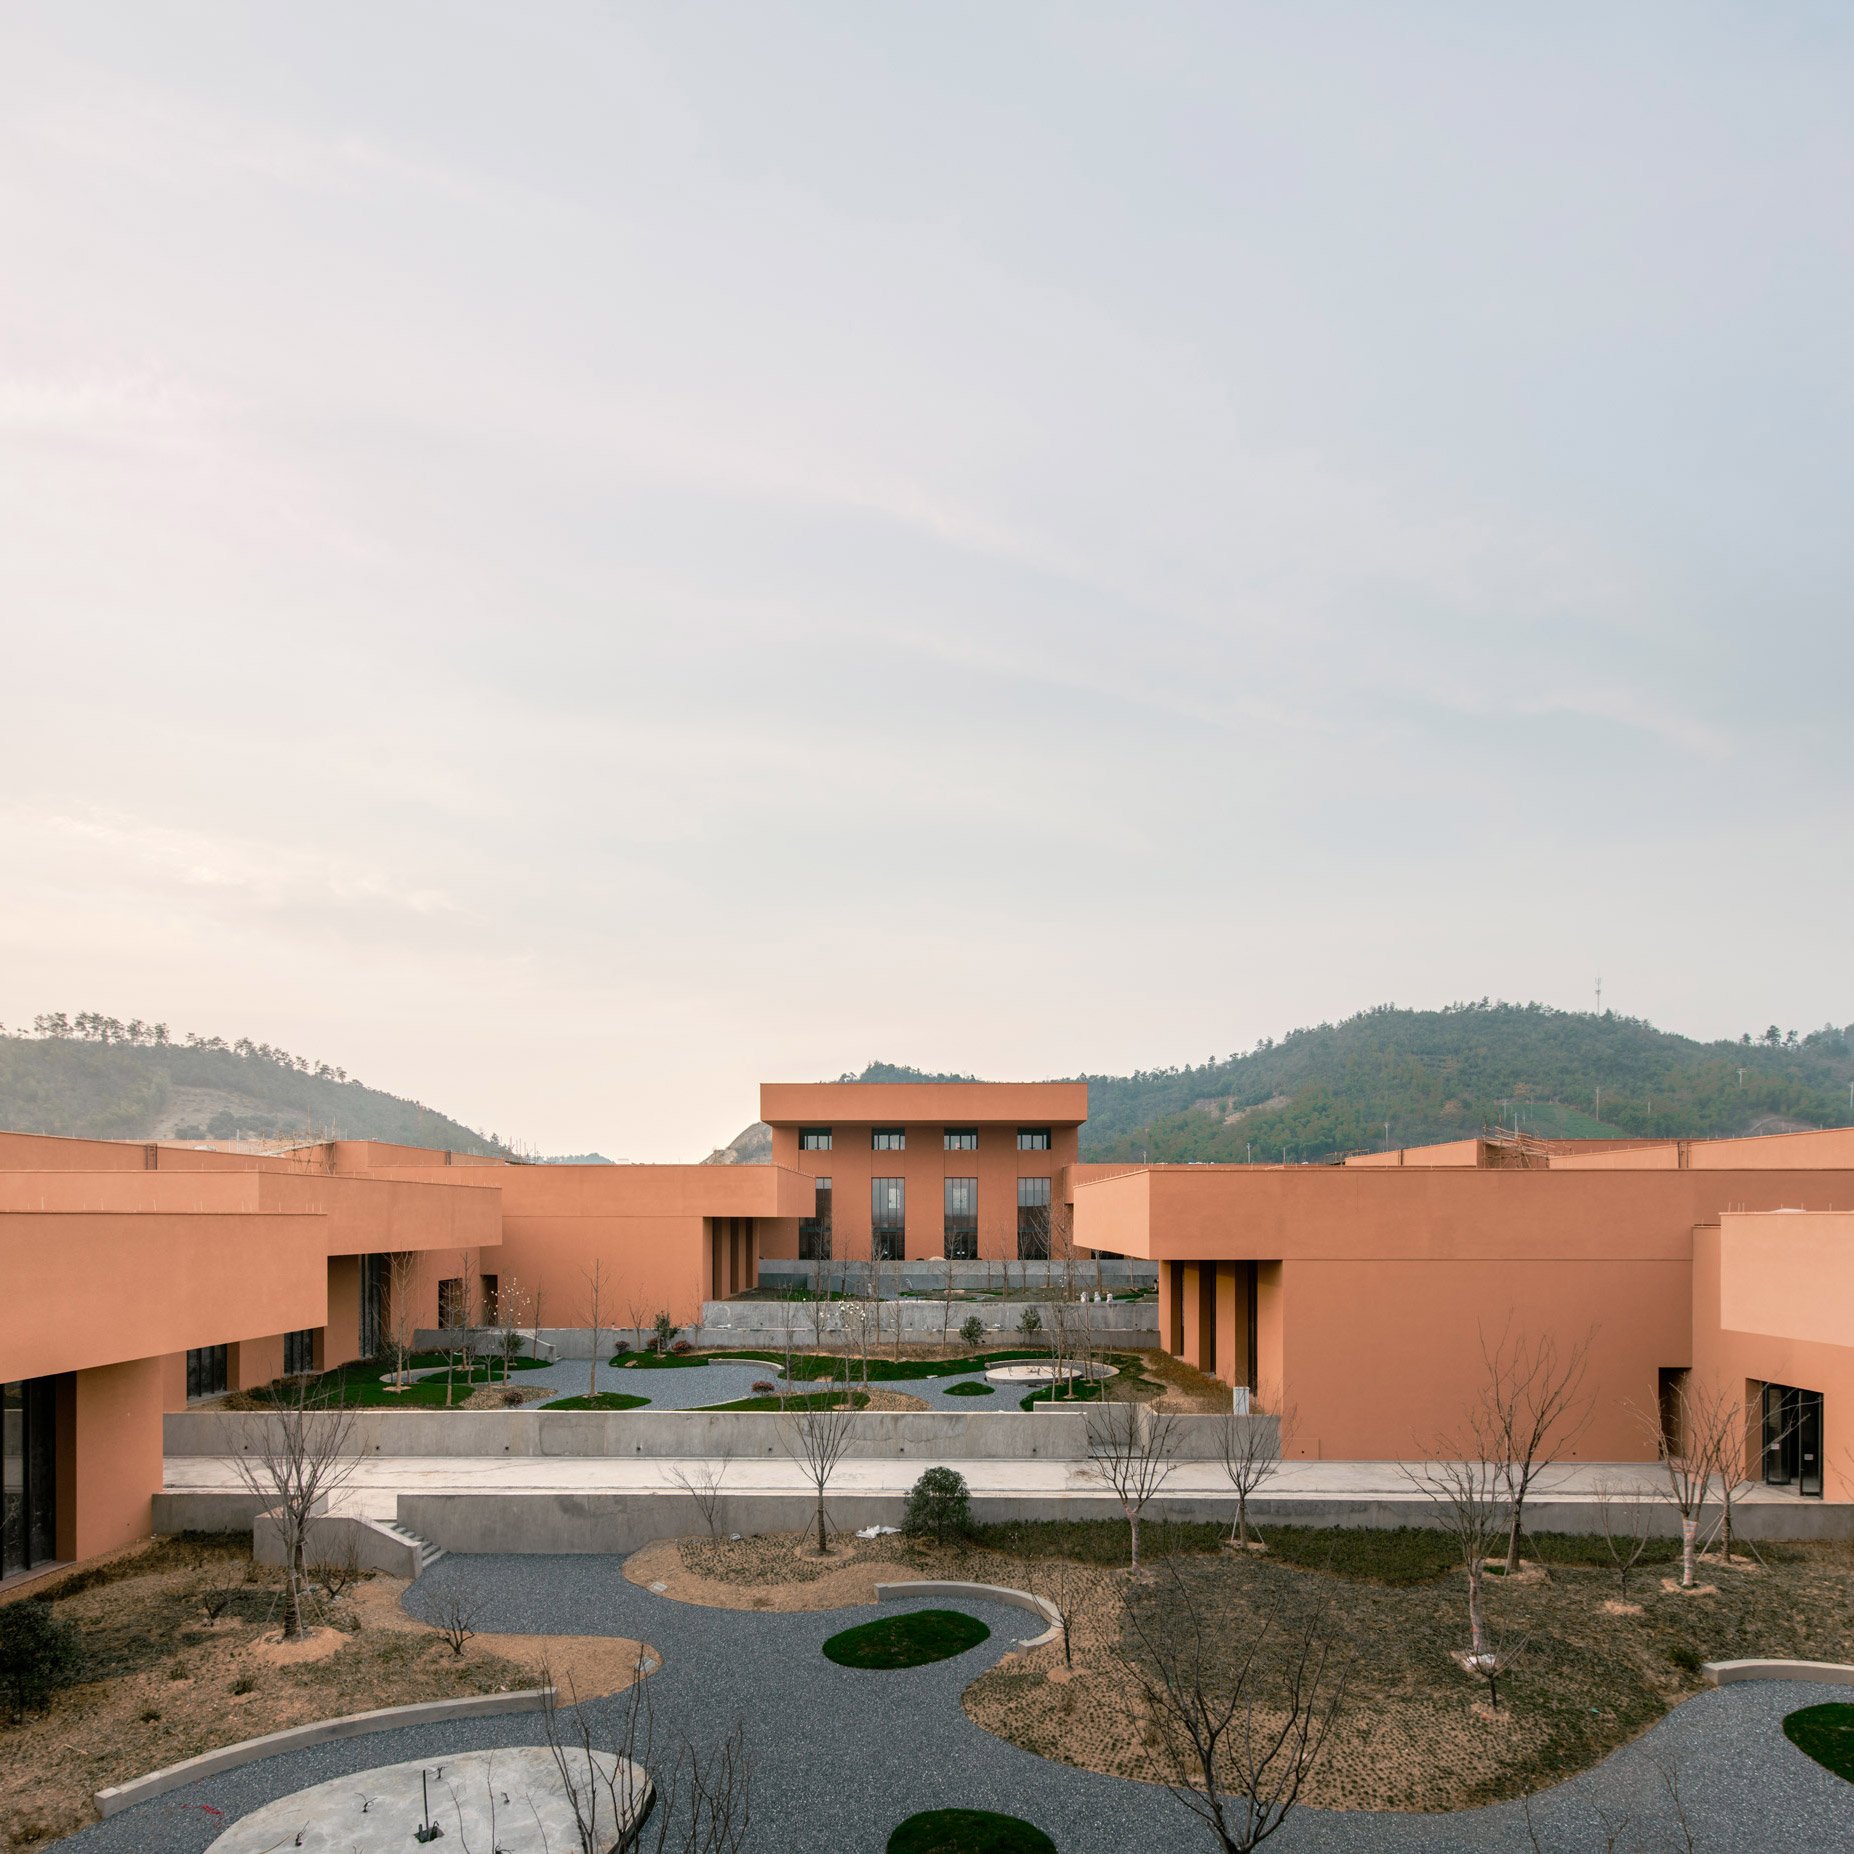 Dezeen's top 10 Chinese architecture projects of 2019: Zhejiang Museum of Natural History, Anji, by David Chipperfield Architects